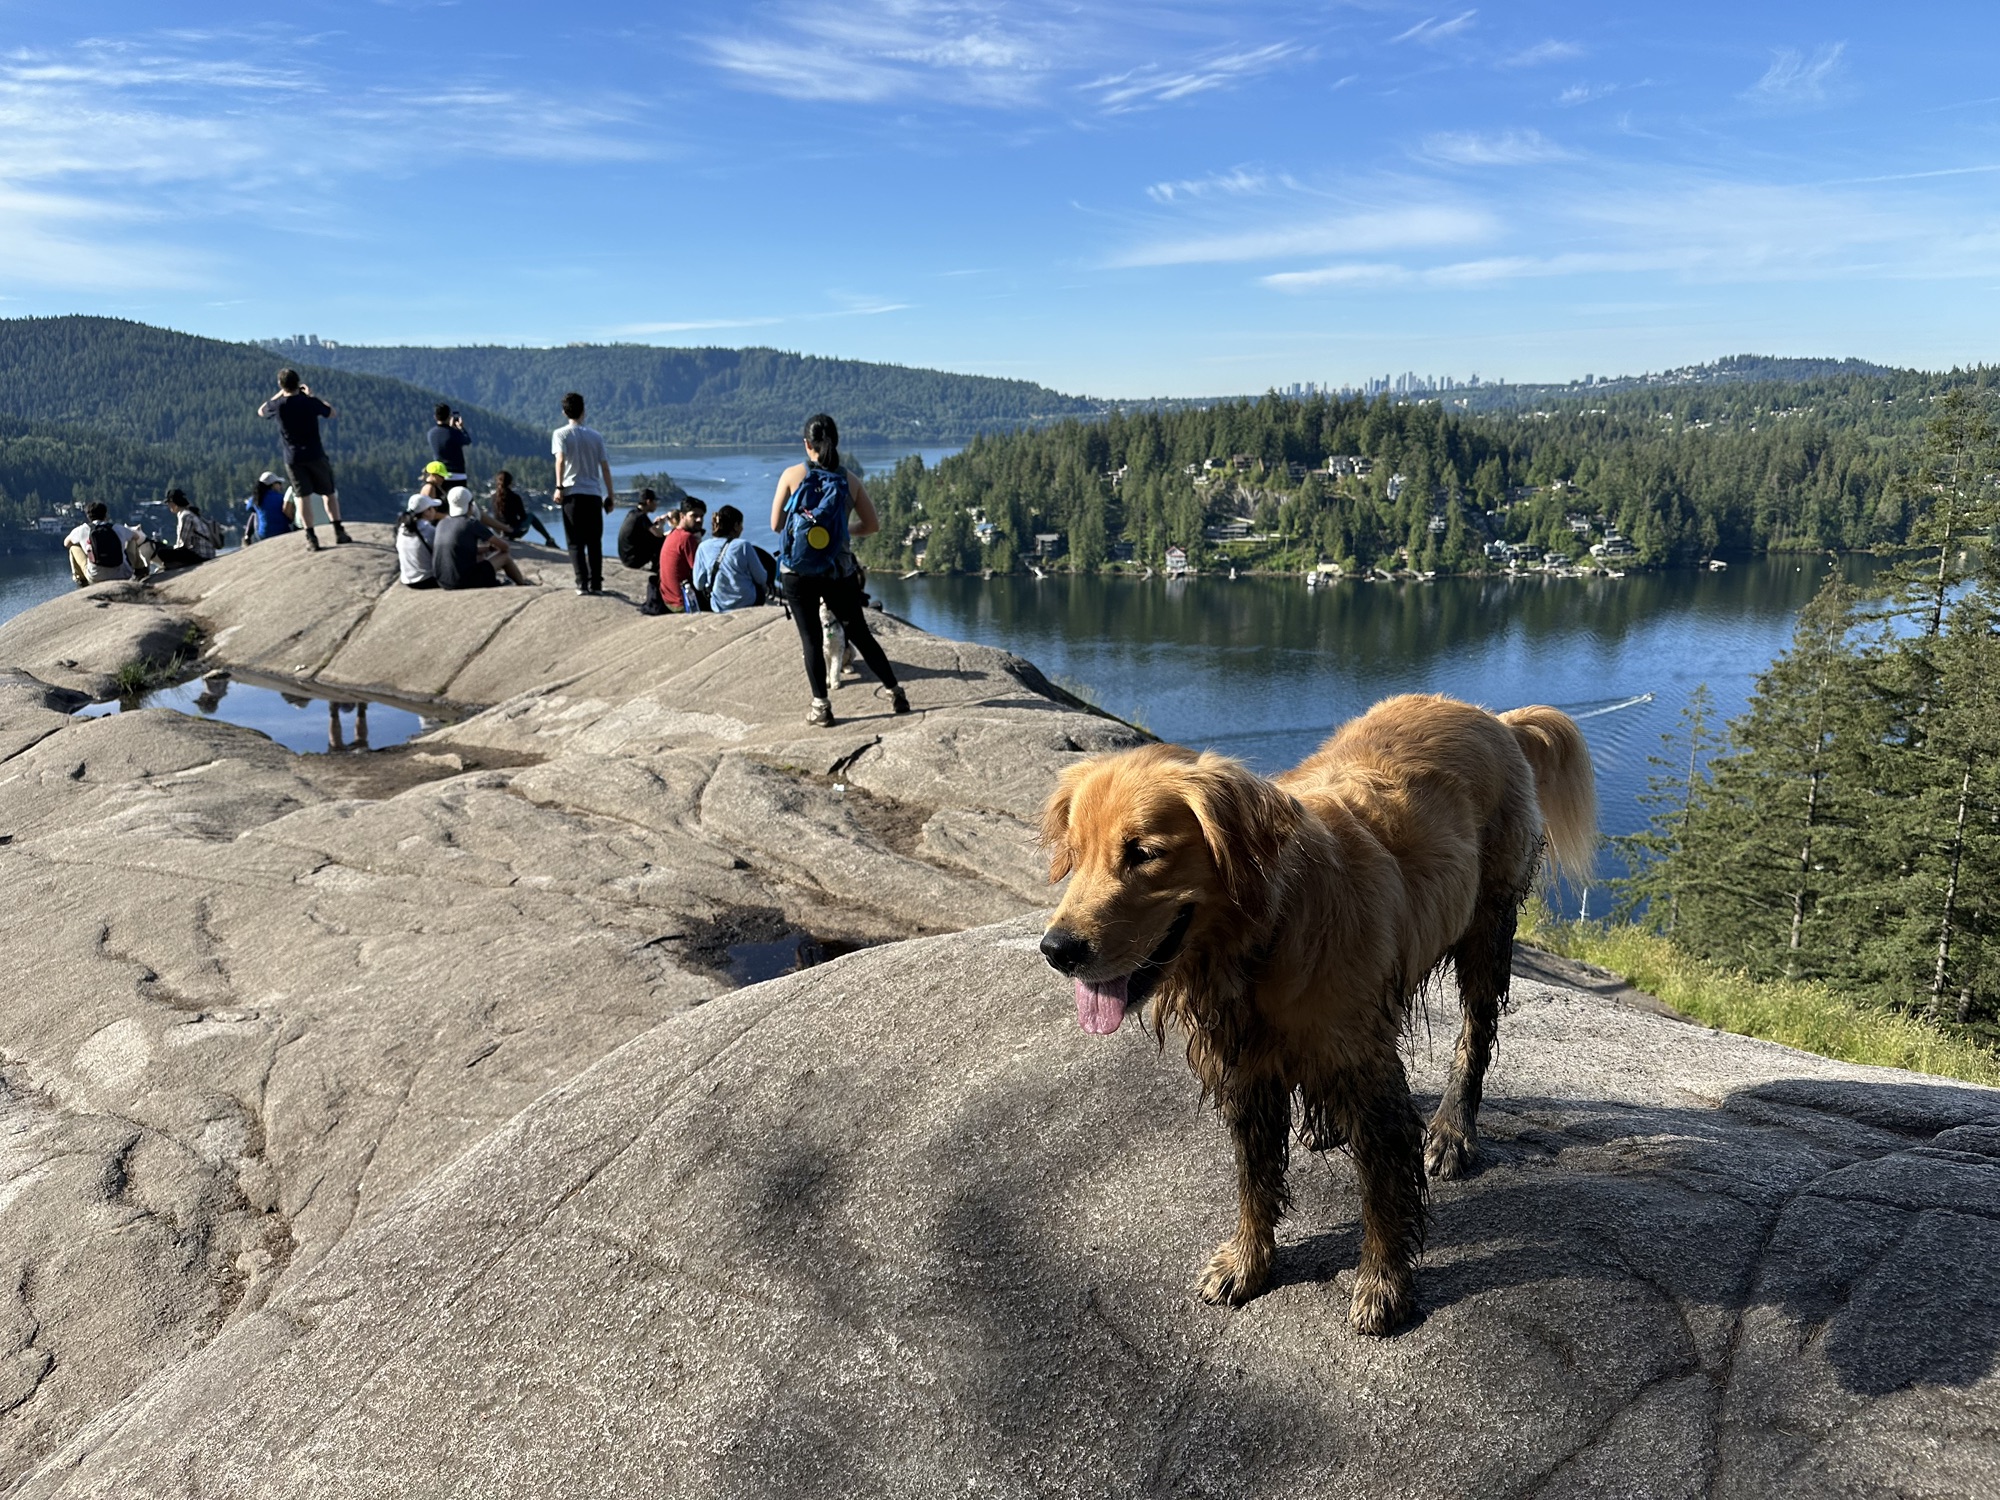 The good boy golden retriever now all muddy, atop Quarry Rock, with lots of people enjoying the view behind him